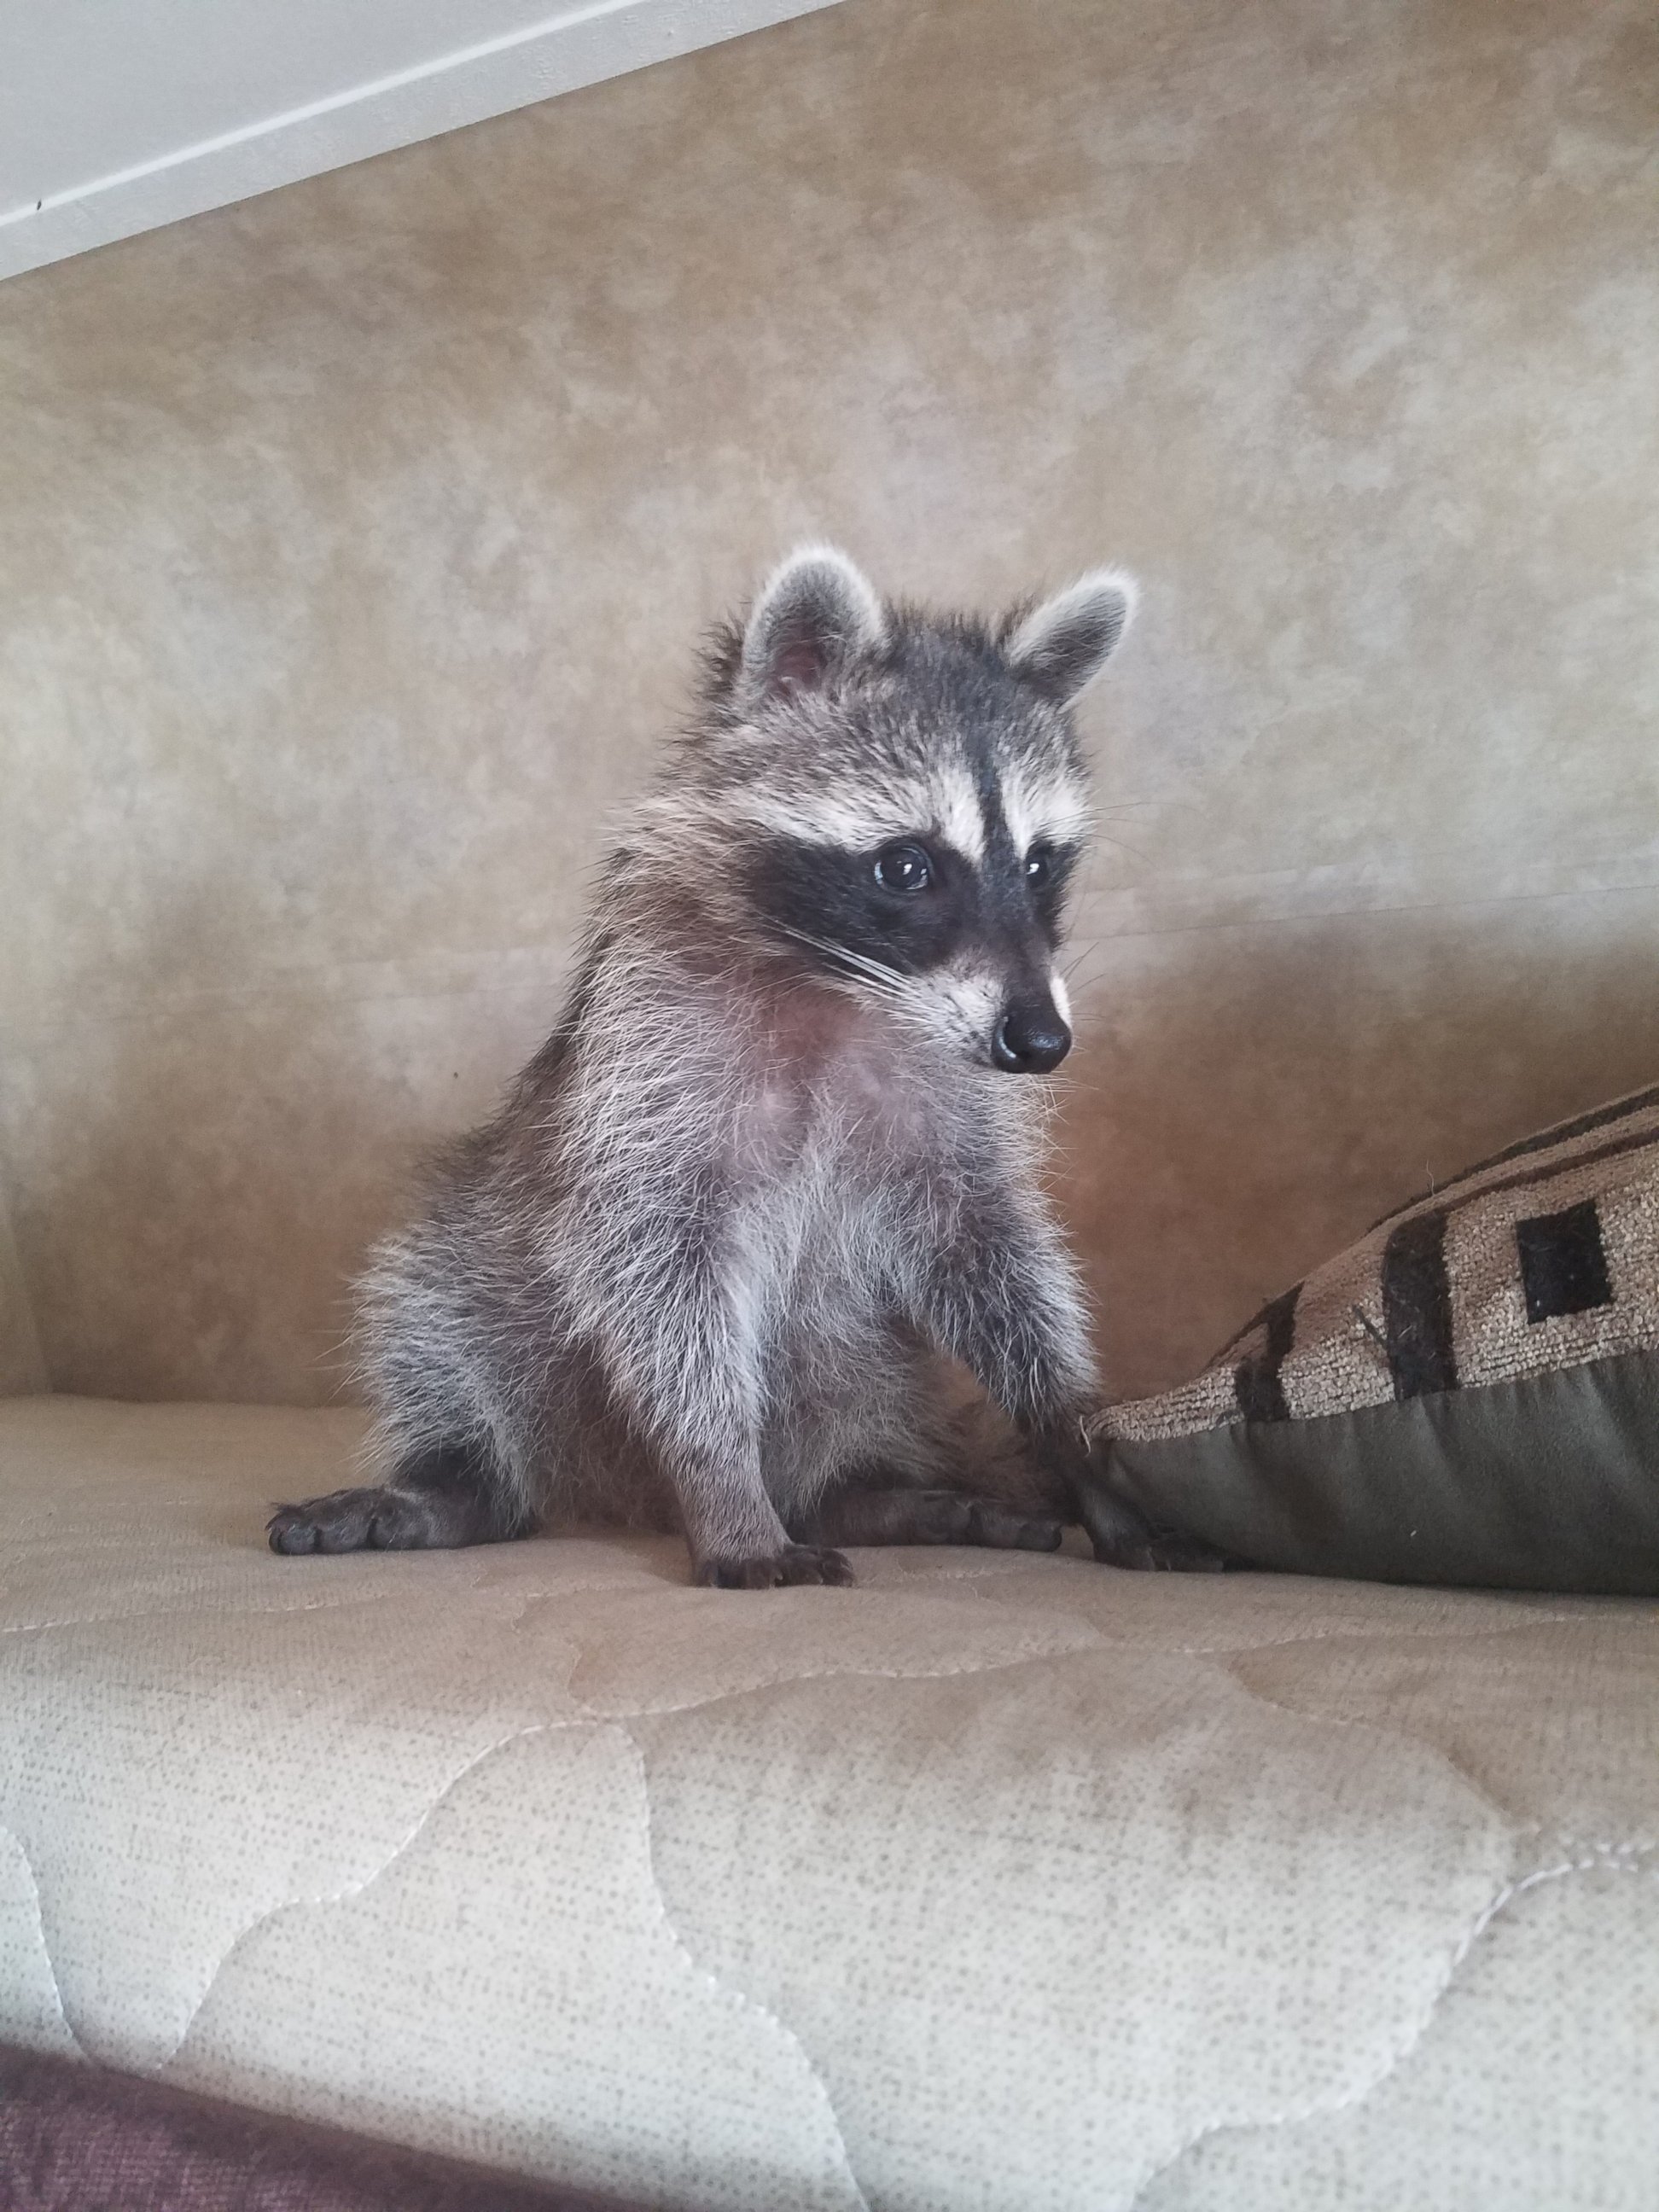 PHOTO: Brittany Cusanek, 29, and Jeremey Brown, 37, have taken in a raccoon they found in the walls of their Fayetteville, Arkansas, home.